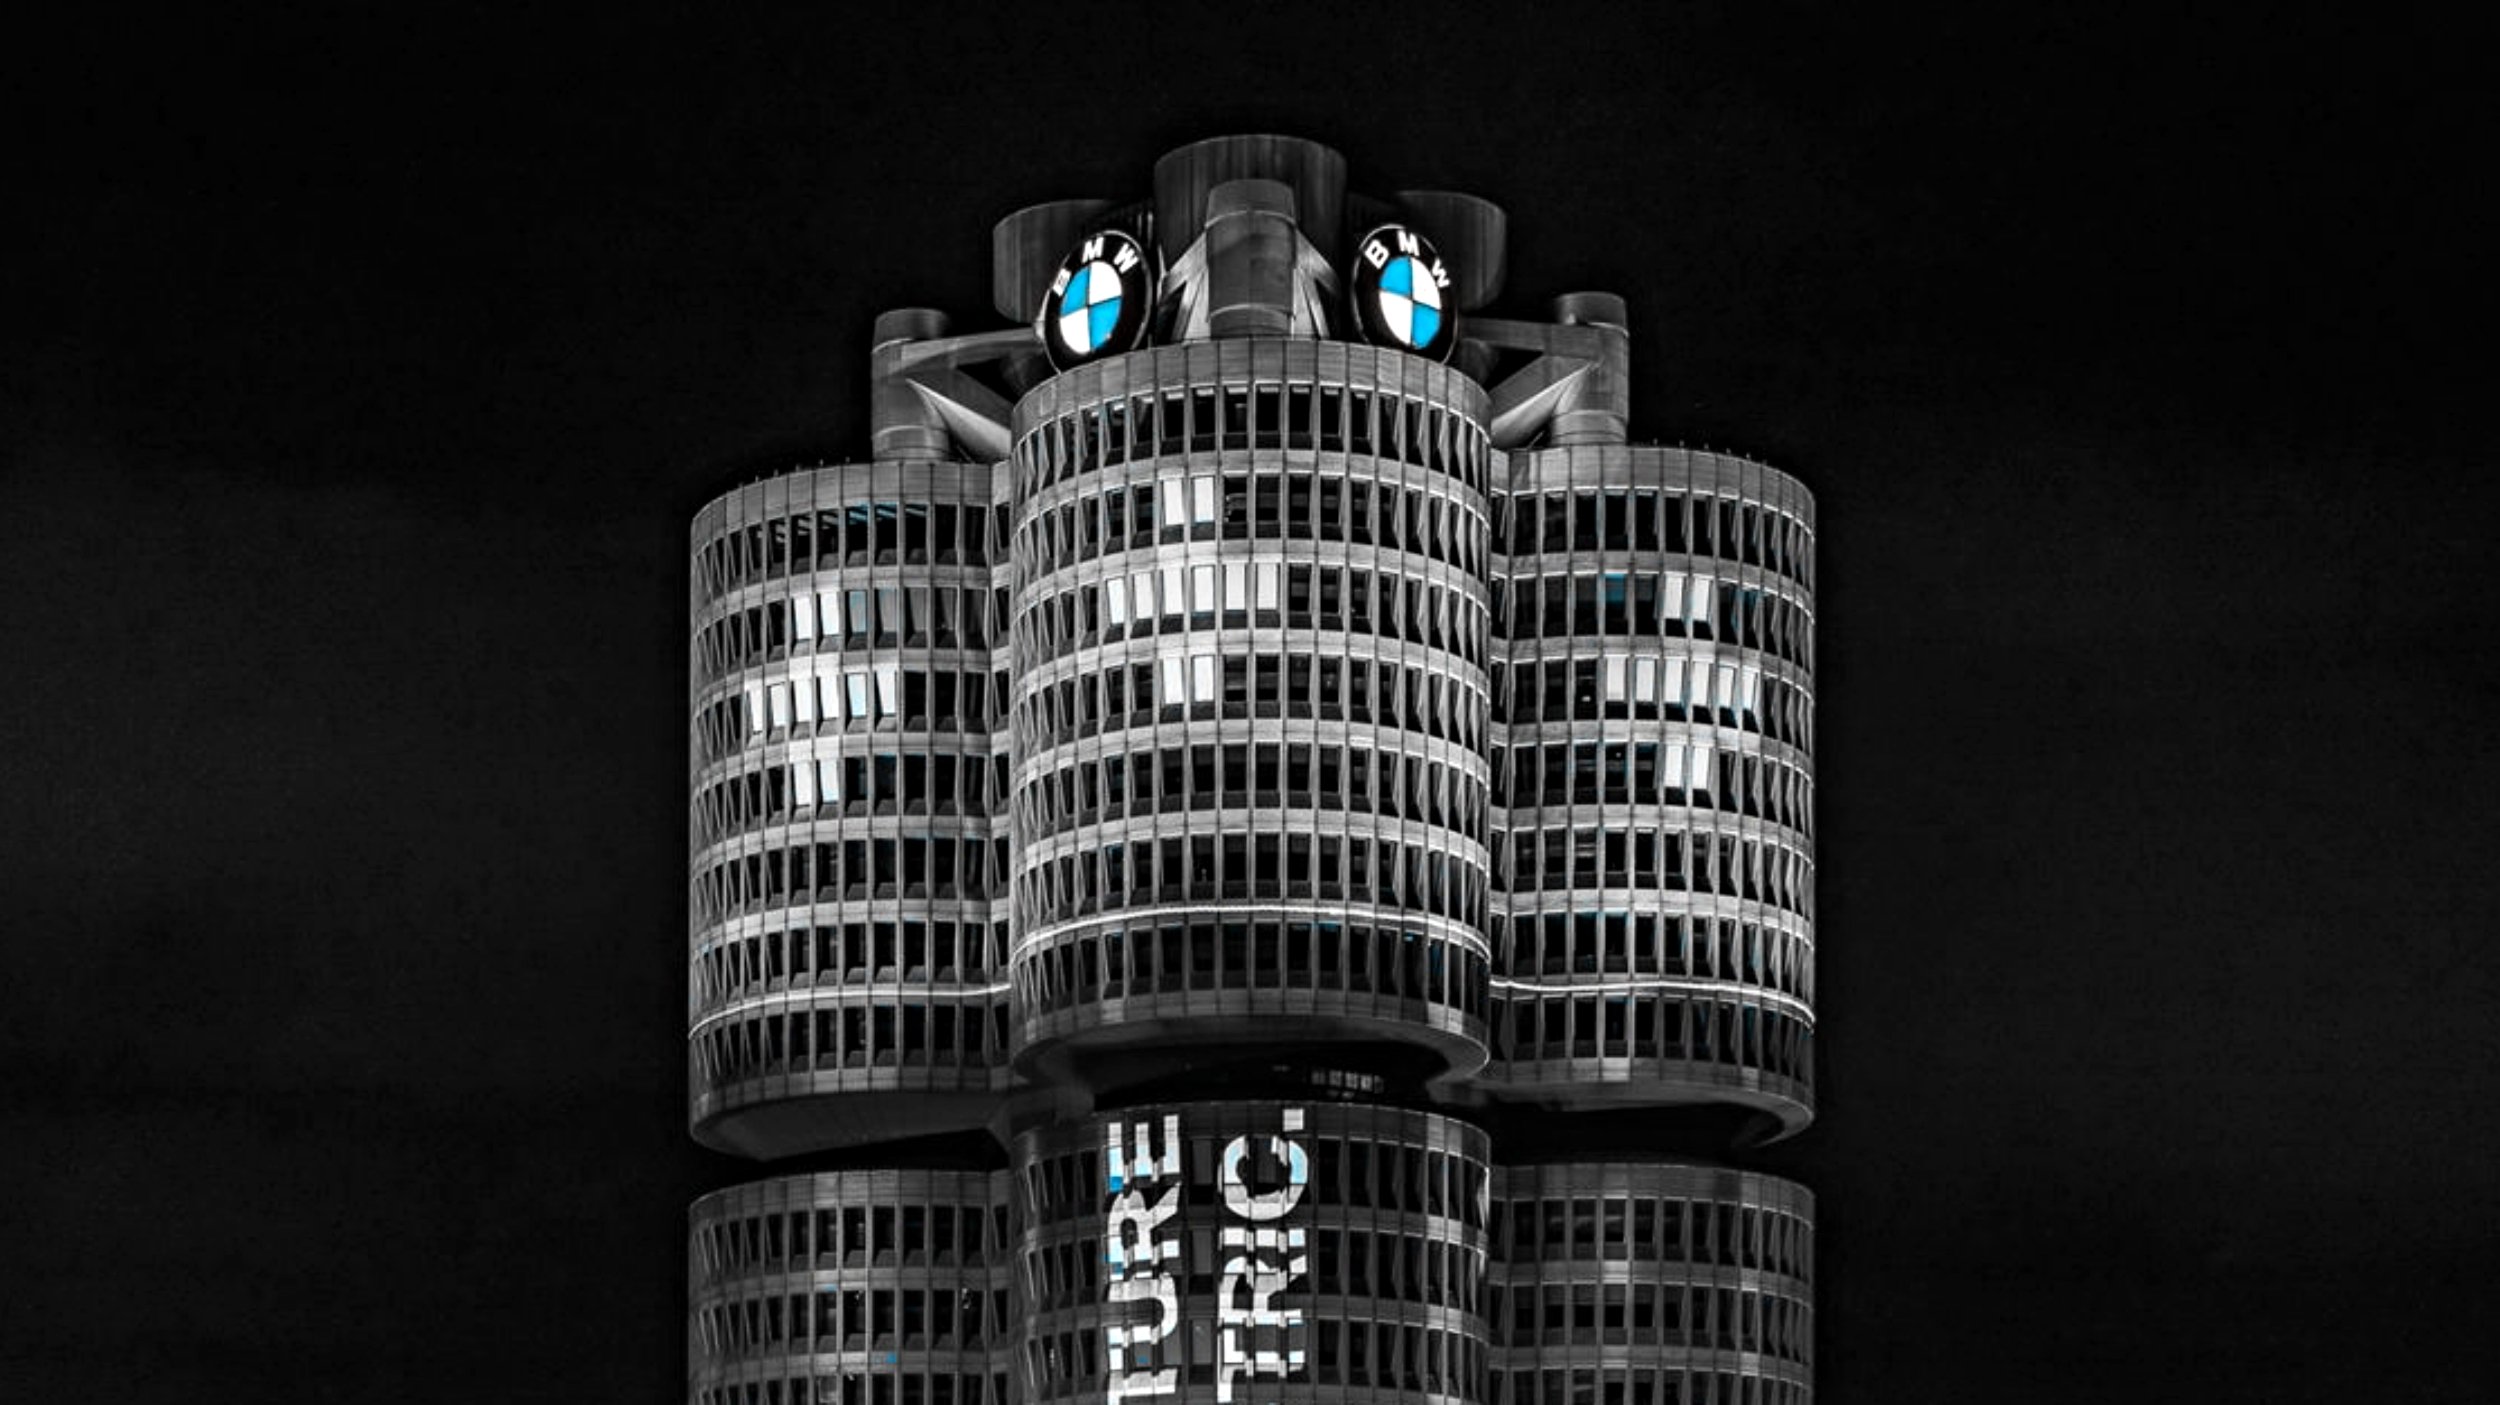 News Bmws Offices Raided “early Suspicion” Of Emissions Rigging